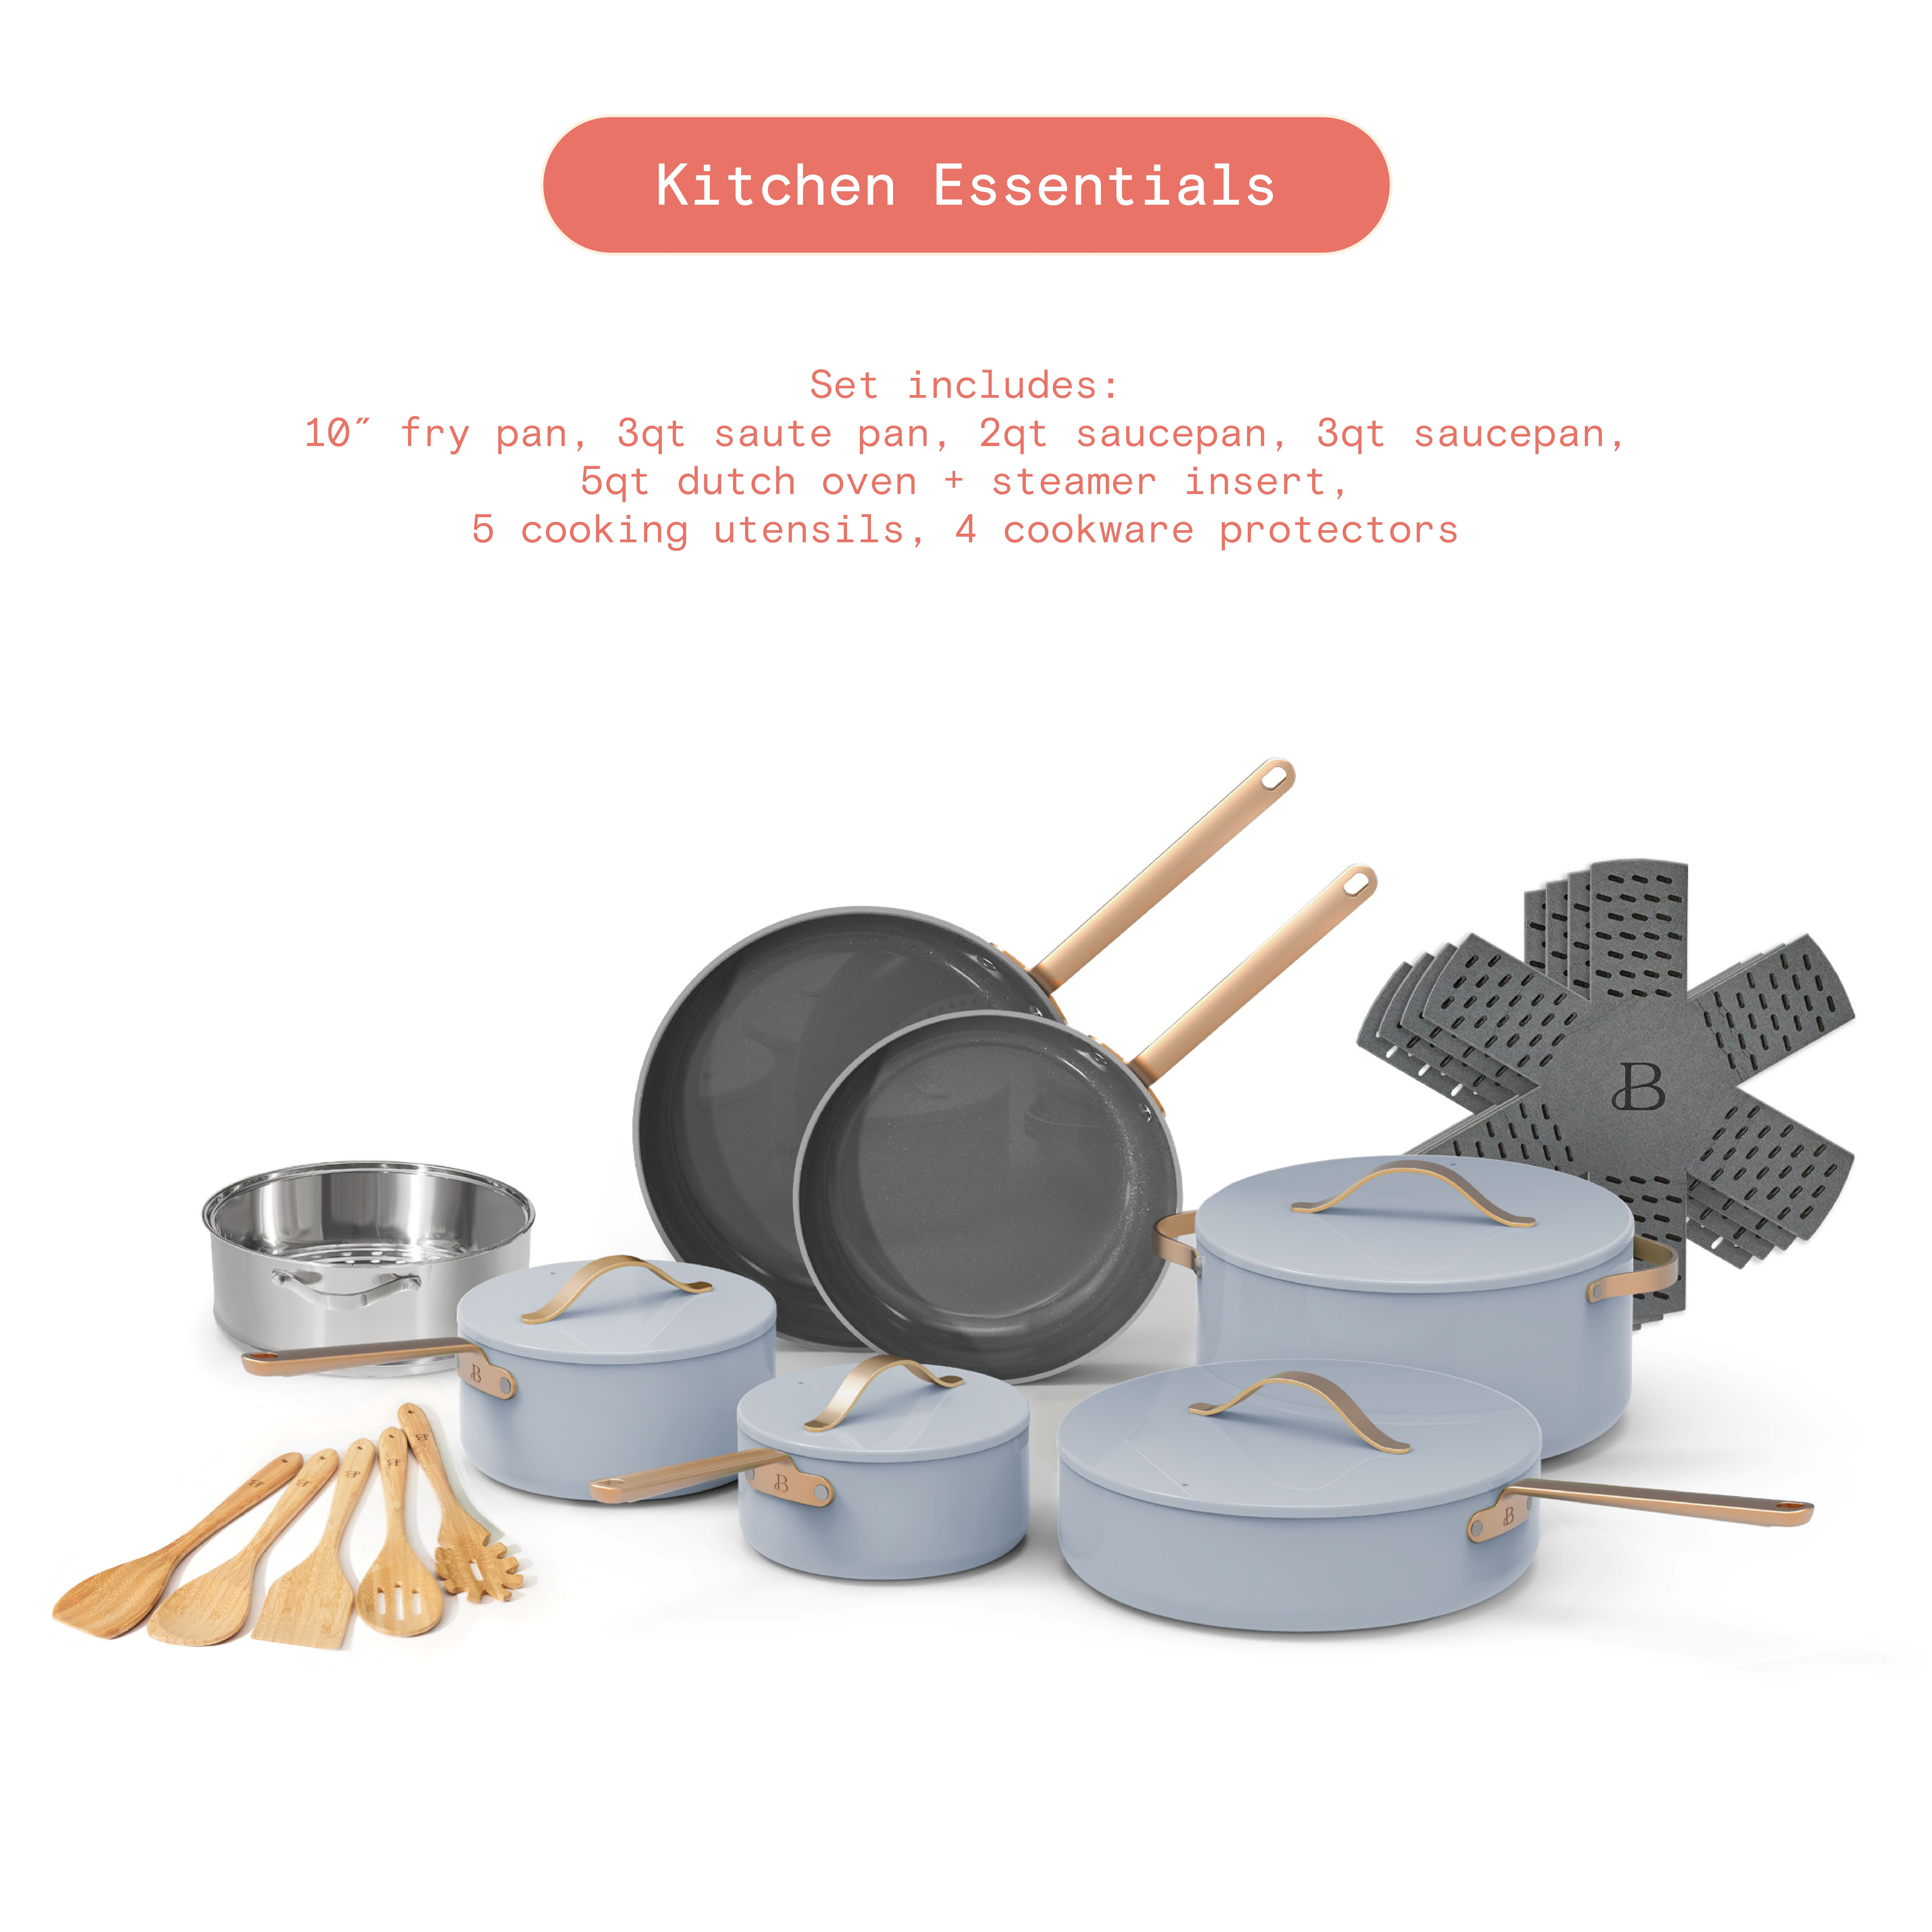 Beautiful 20pc Ceramic Non-Stick Cookware Set, Cornflower Blue by Drew Barrymore - image 4 of 7